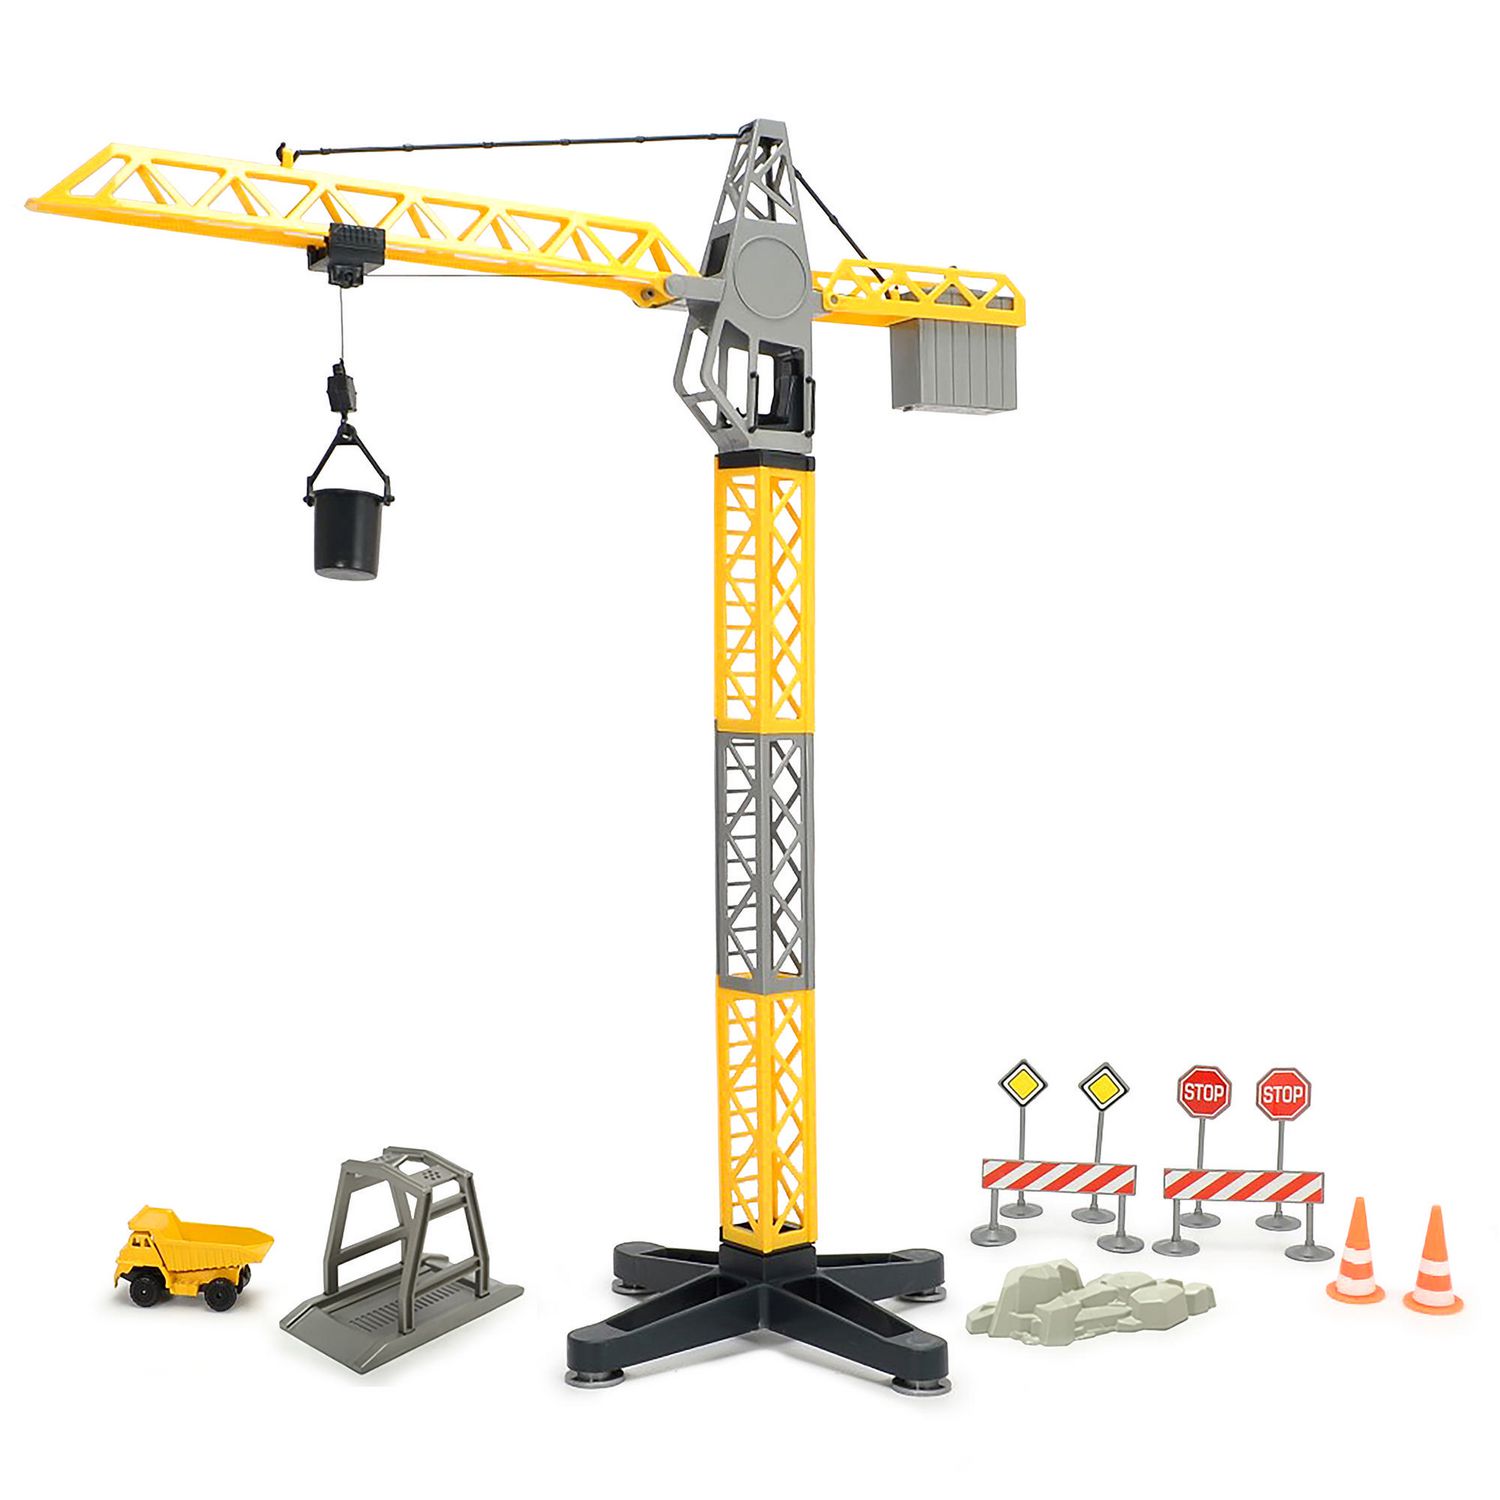 Adventure Force Battery-Operated Crane Play Set 